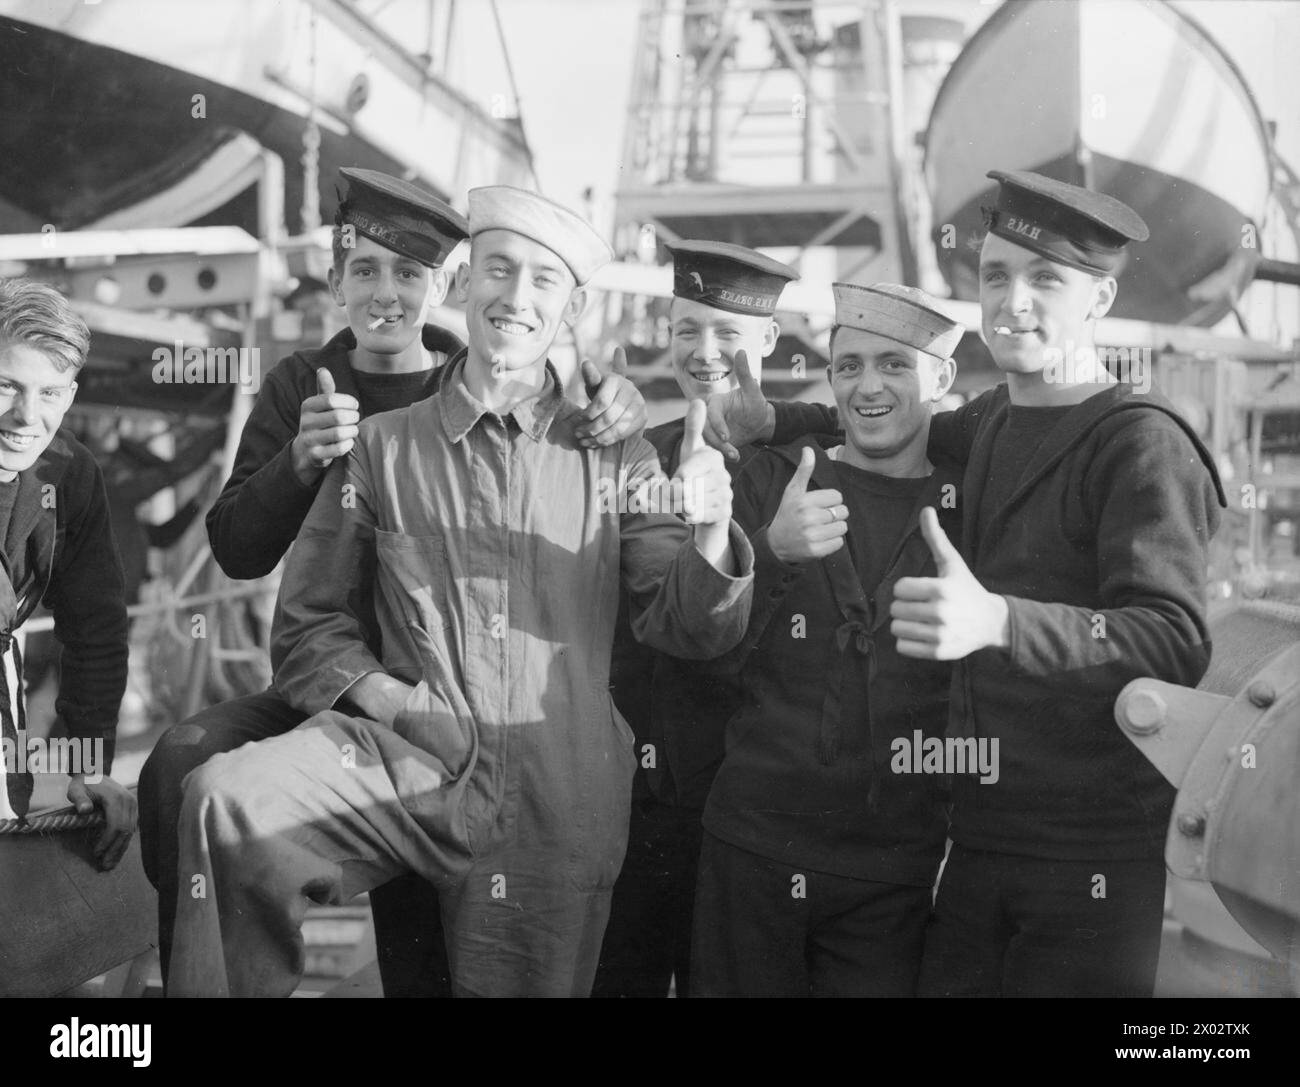 ARRIVAL OF THE FIRST FLOTILLA OF AMERICAN DESTROYERS FOR ROYAL NAVY. 28 SEPTEMBER 1940, ROYAL DOCKYARD, DEVONPORT. THE FLOTILLA, HANDED OVER BY THE US GOVERNMENT UNDER THE AGREEMENT, WERE MANNED ENTIRELY BY BRITISH CREWS. - "Thumbs Up" by members of the British naval crew who brought the destroyers to this country. Two of the crew brought American Naval caps which they obtained from the destroyer's American crew who were on board prior to the handing over Stock Photo